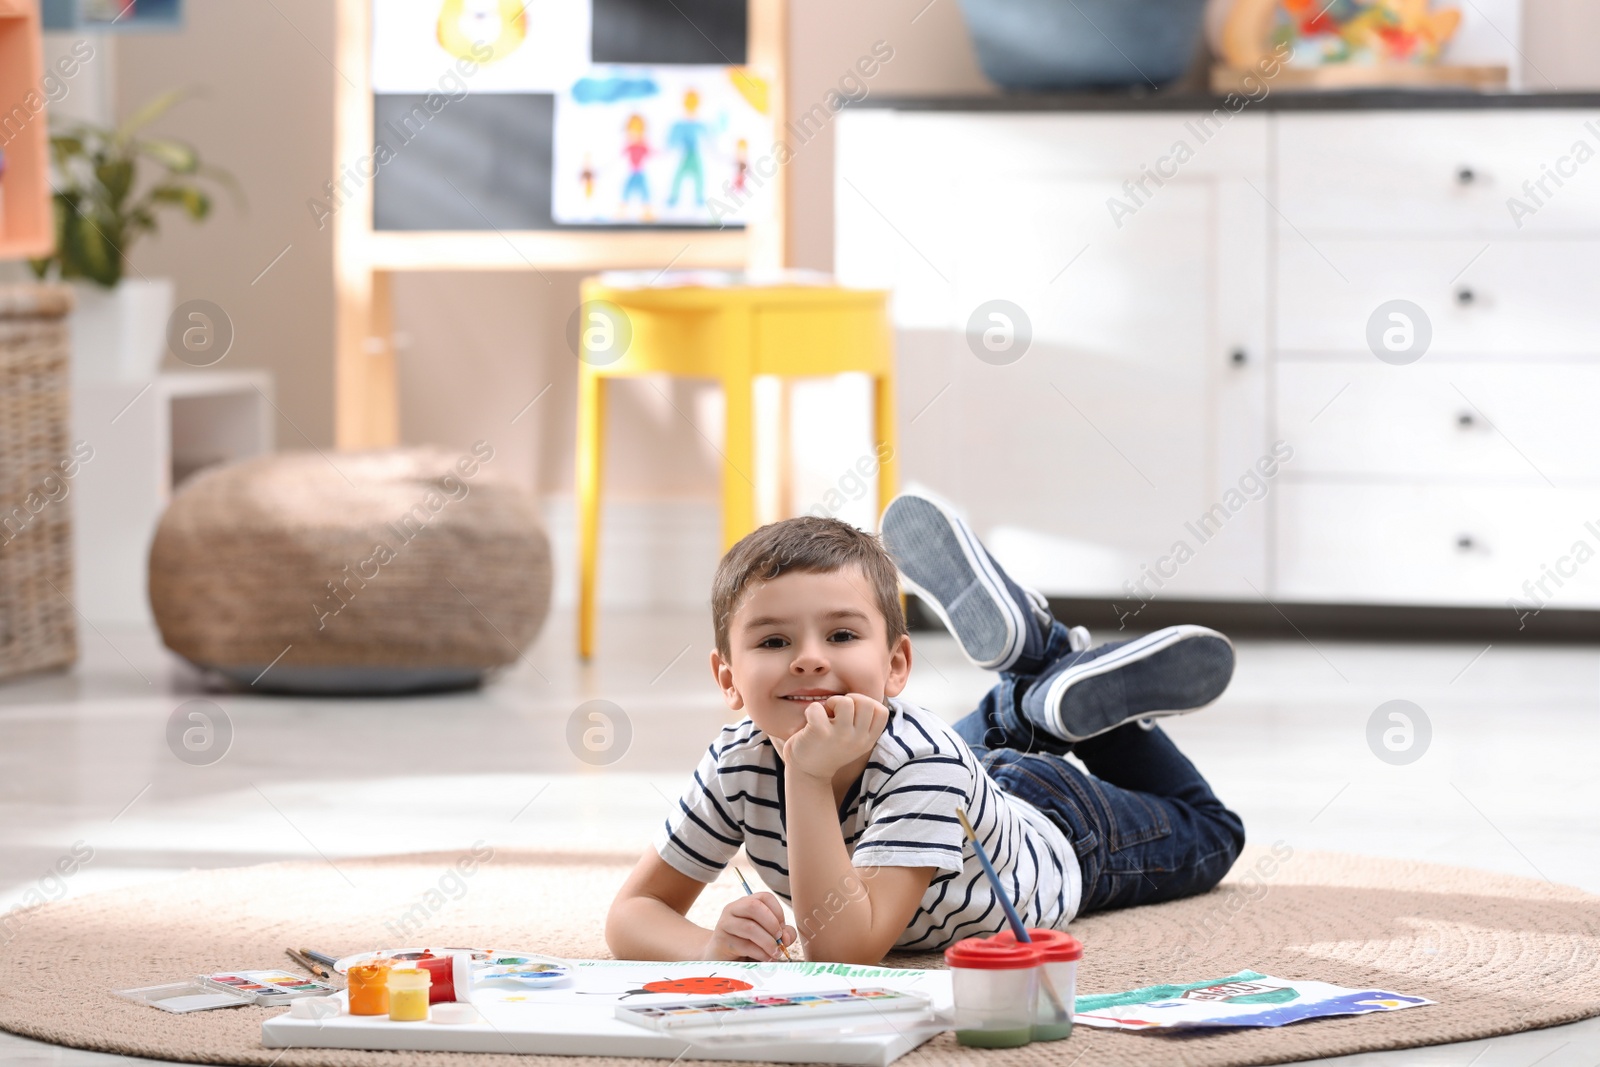 Photo of Little child painting on floor at home